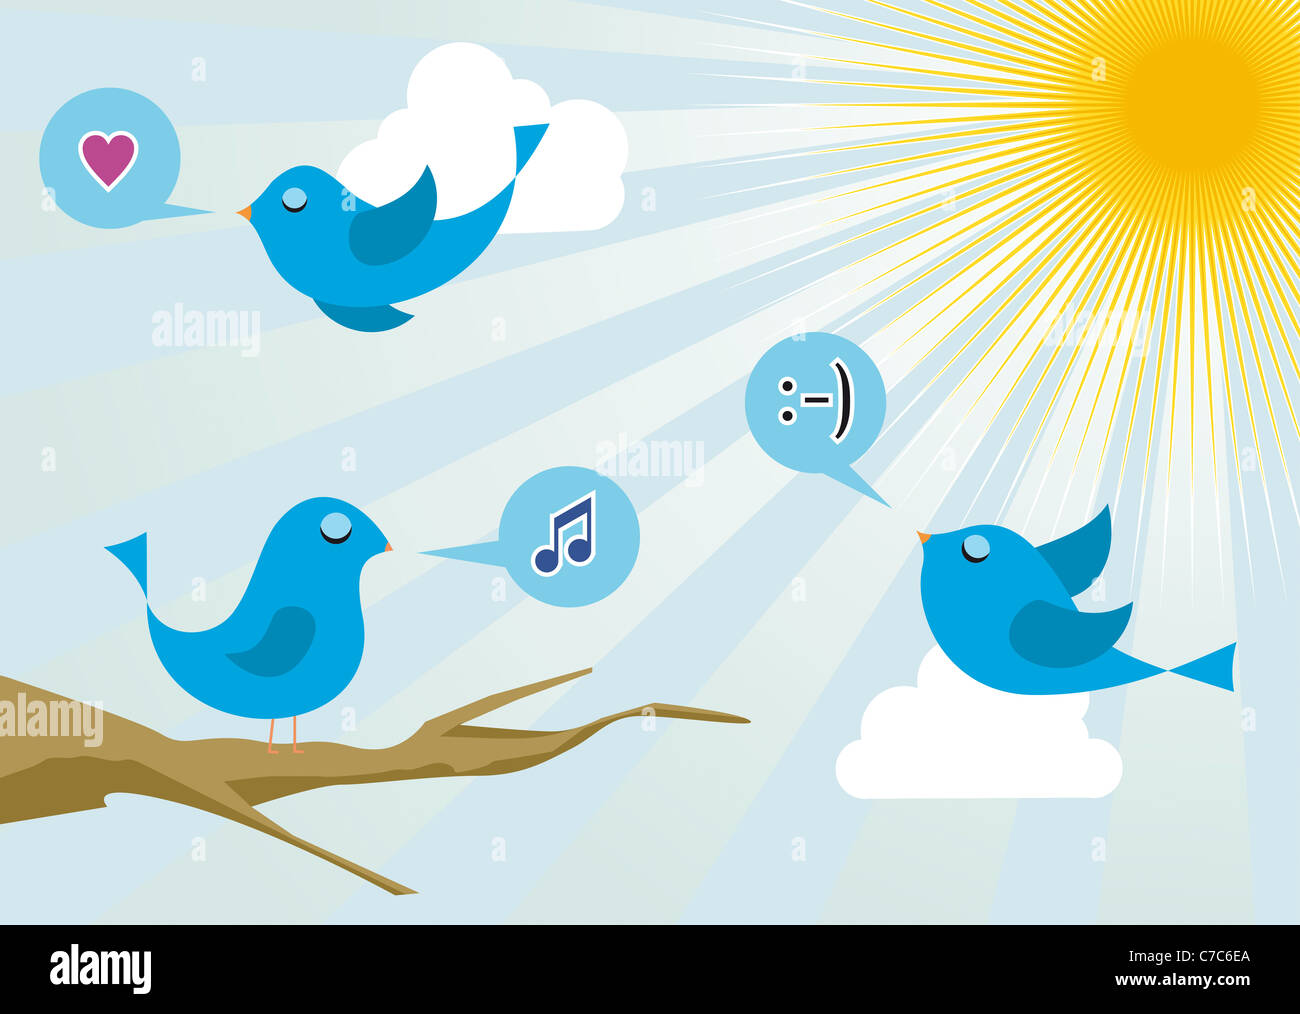 Twitter birds morning communication. Social media network connection concept Stock Photo